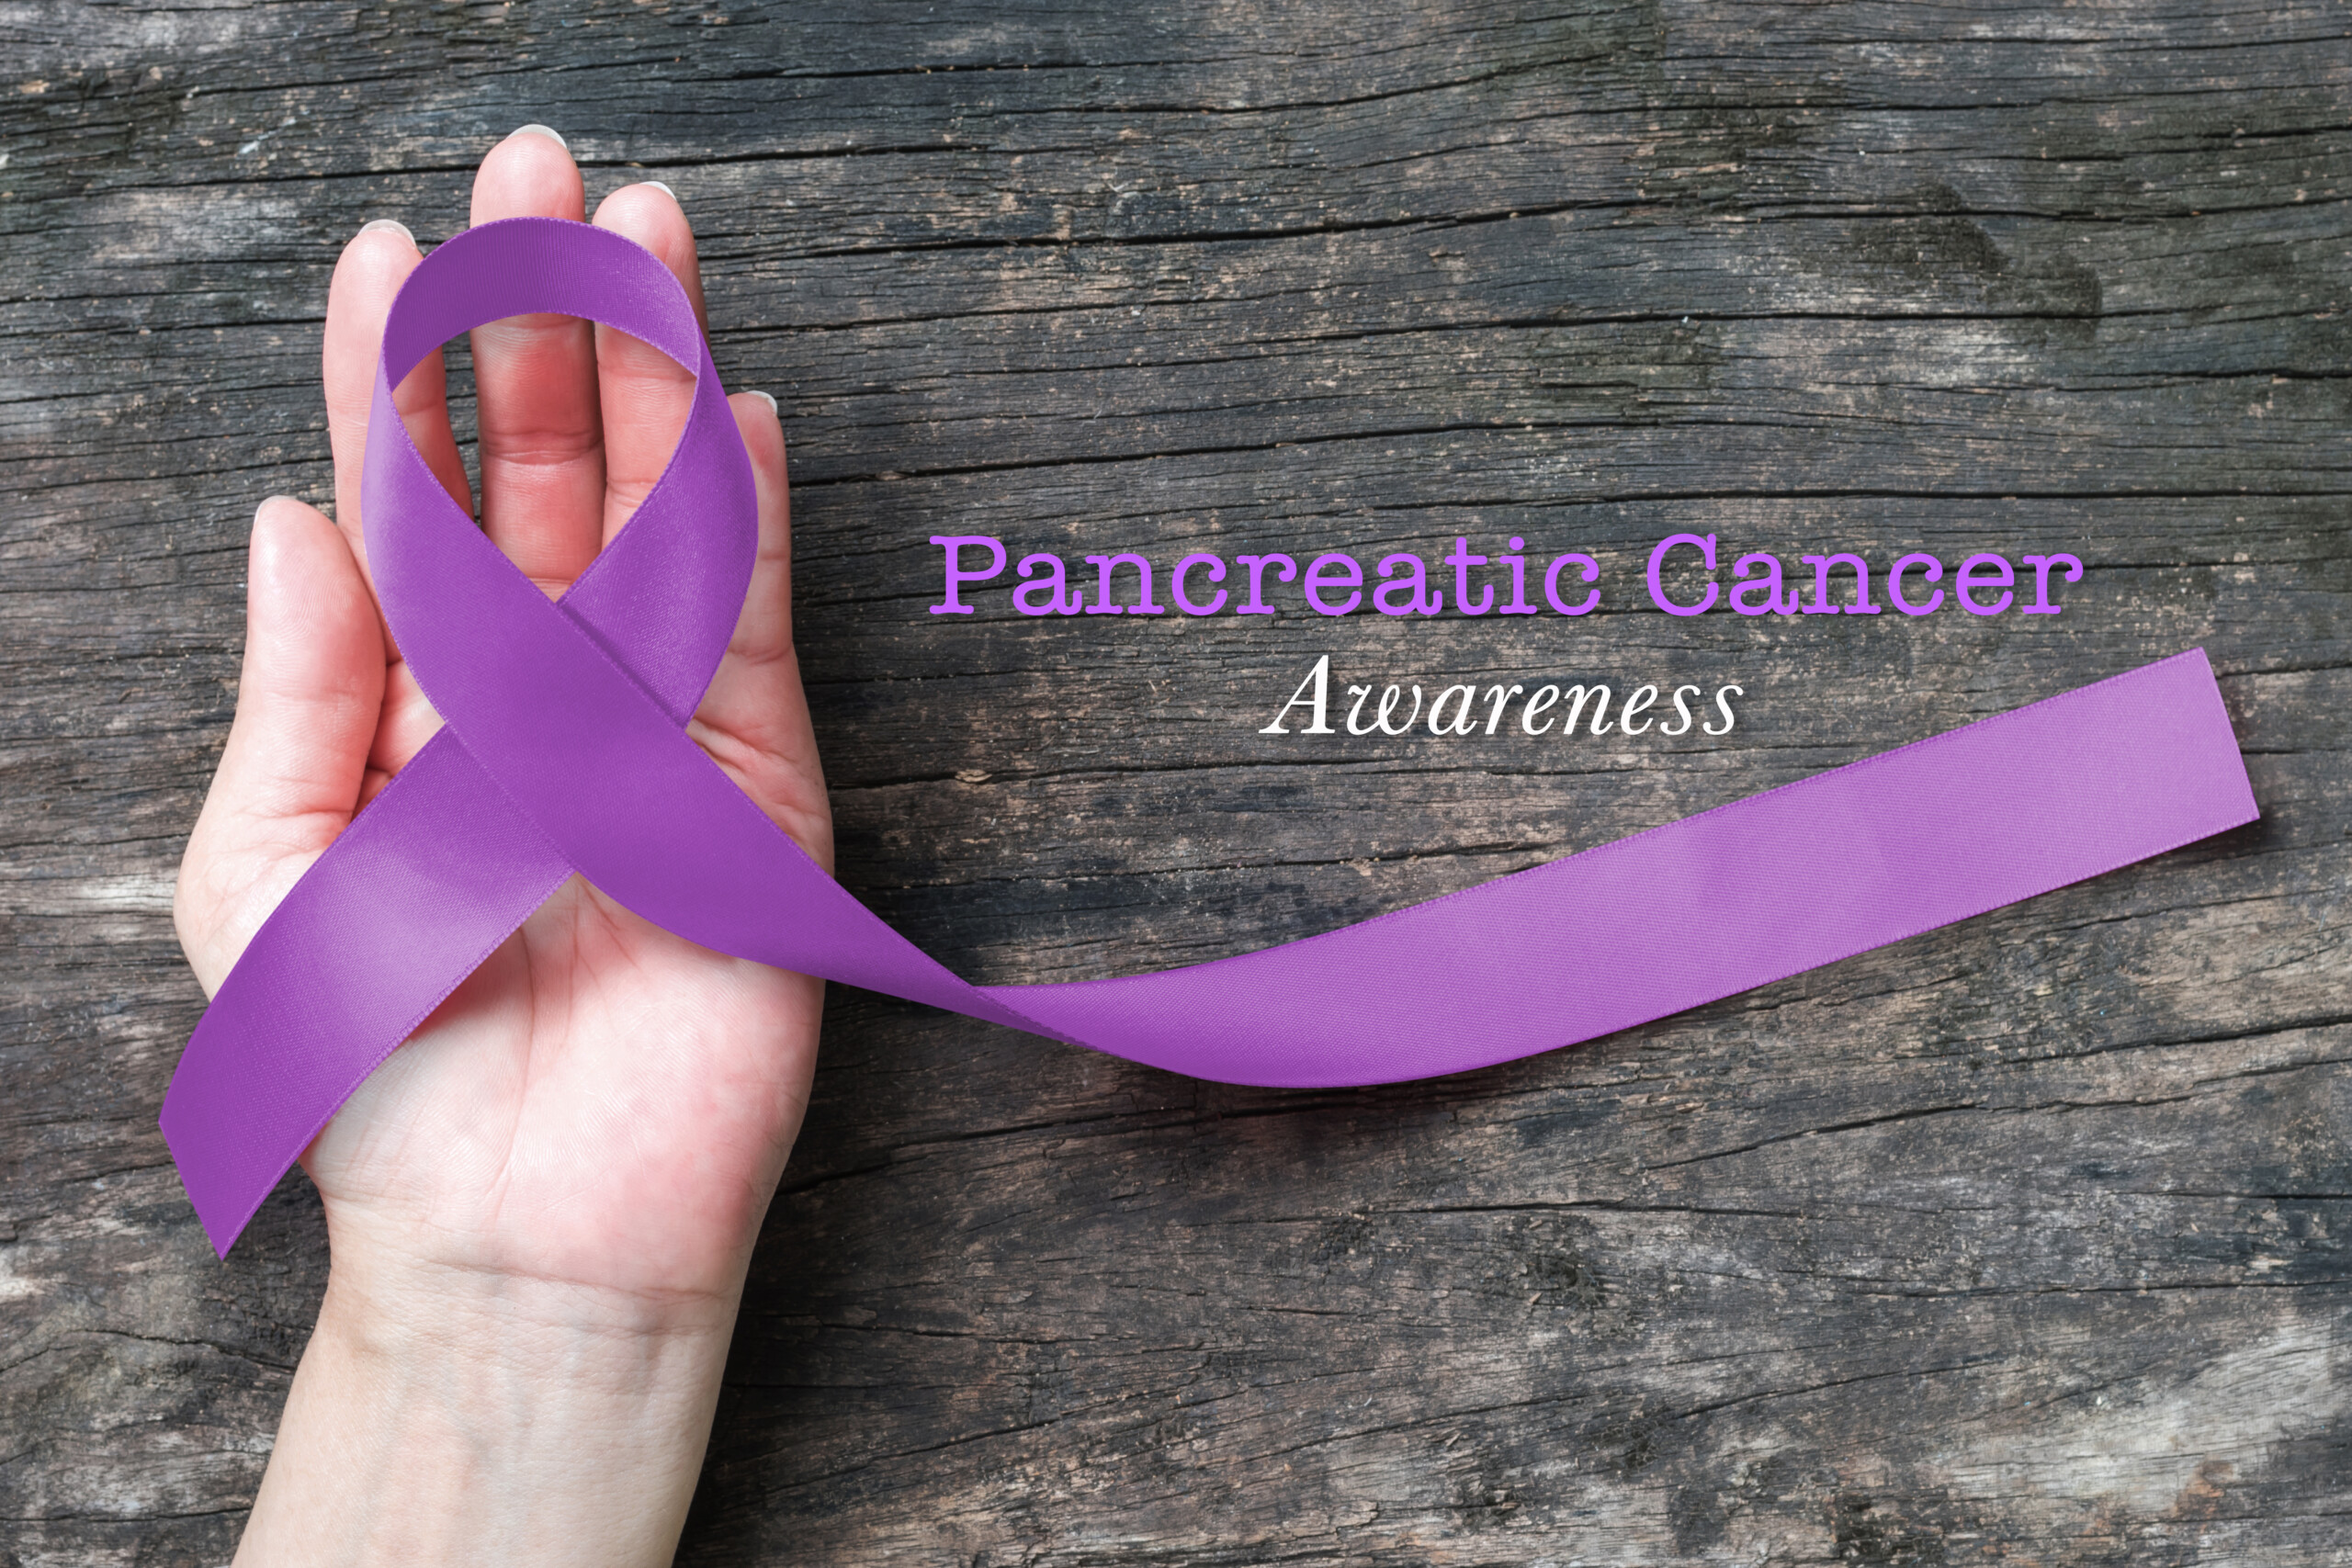 Can Untreated Symptoms for 3 Years Be Pancreatic Cancer?